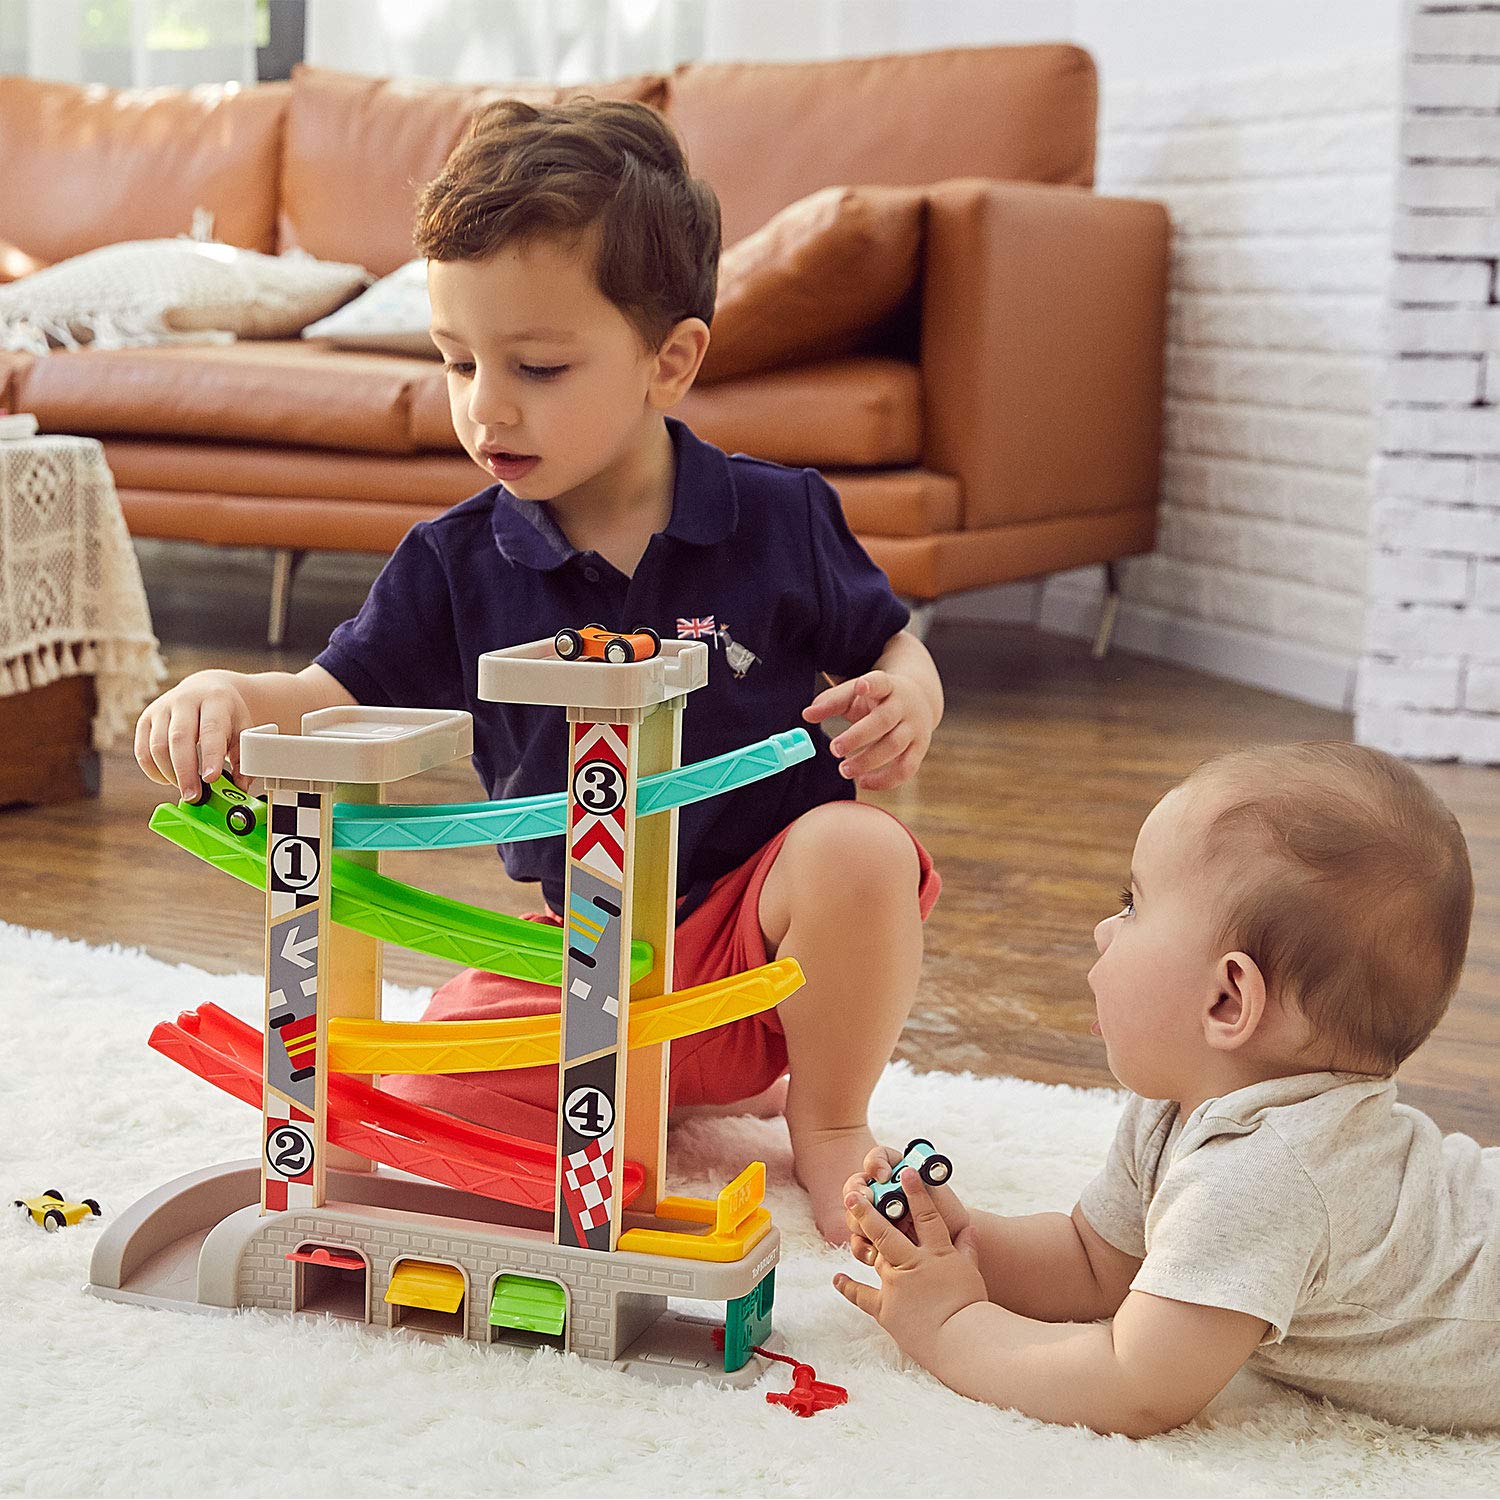 TOP BRIGHT Car Ramp Toy for 1 2 3 Year Old Boy Gifts, Toddler Race Track Toy with 4 Wooden Cars and 3 Car Garage